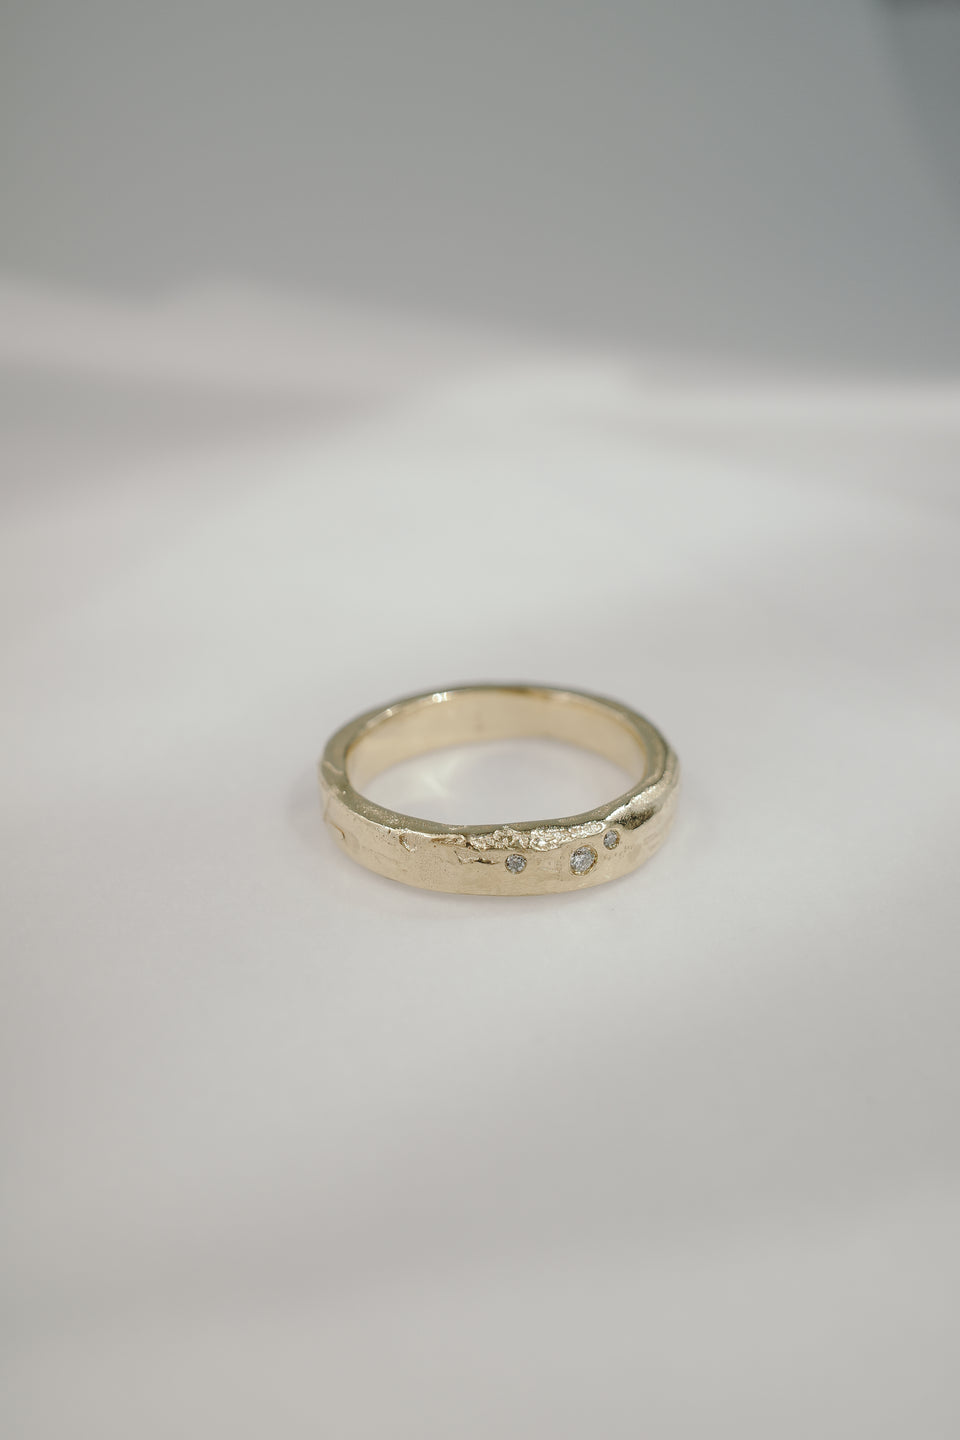 Eroded Flat Band in Fairmined Gold with Salt + Pepper Diamonds